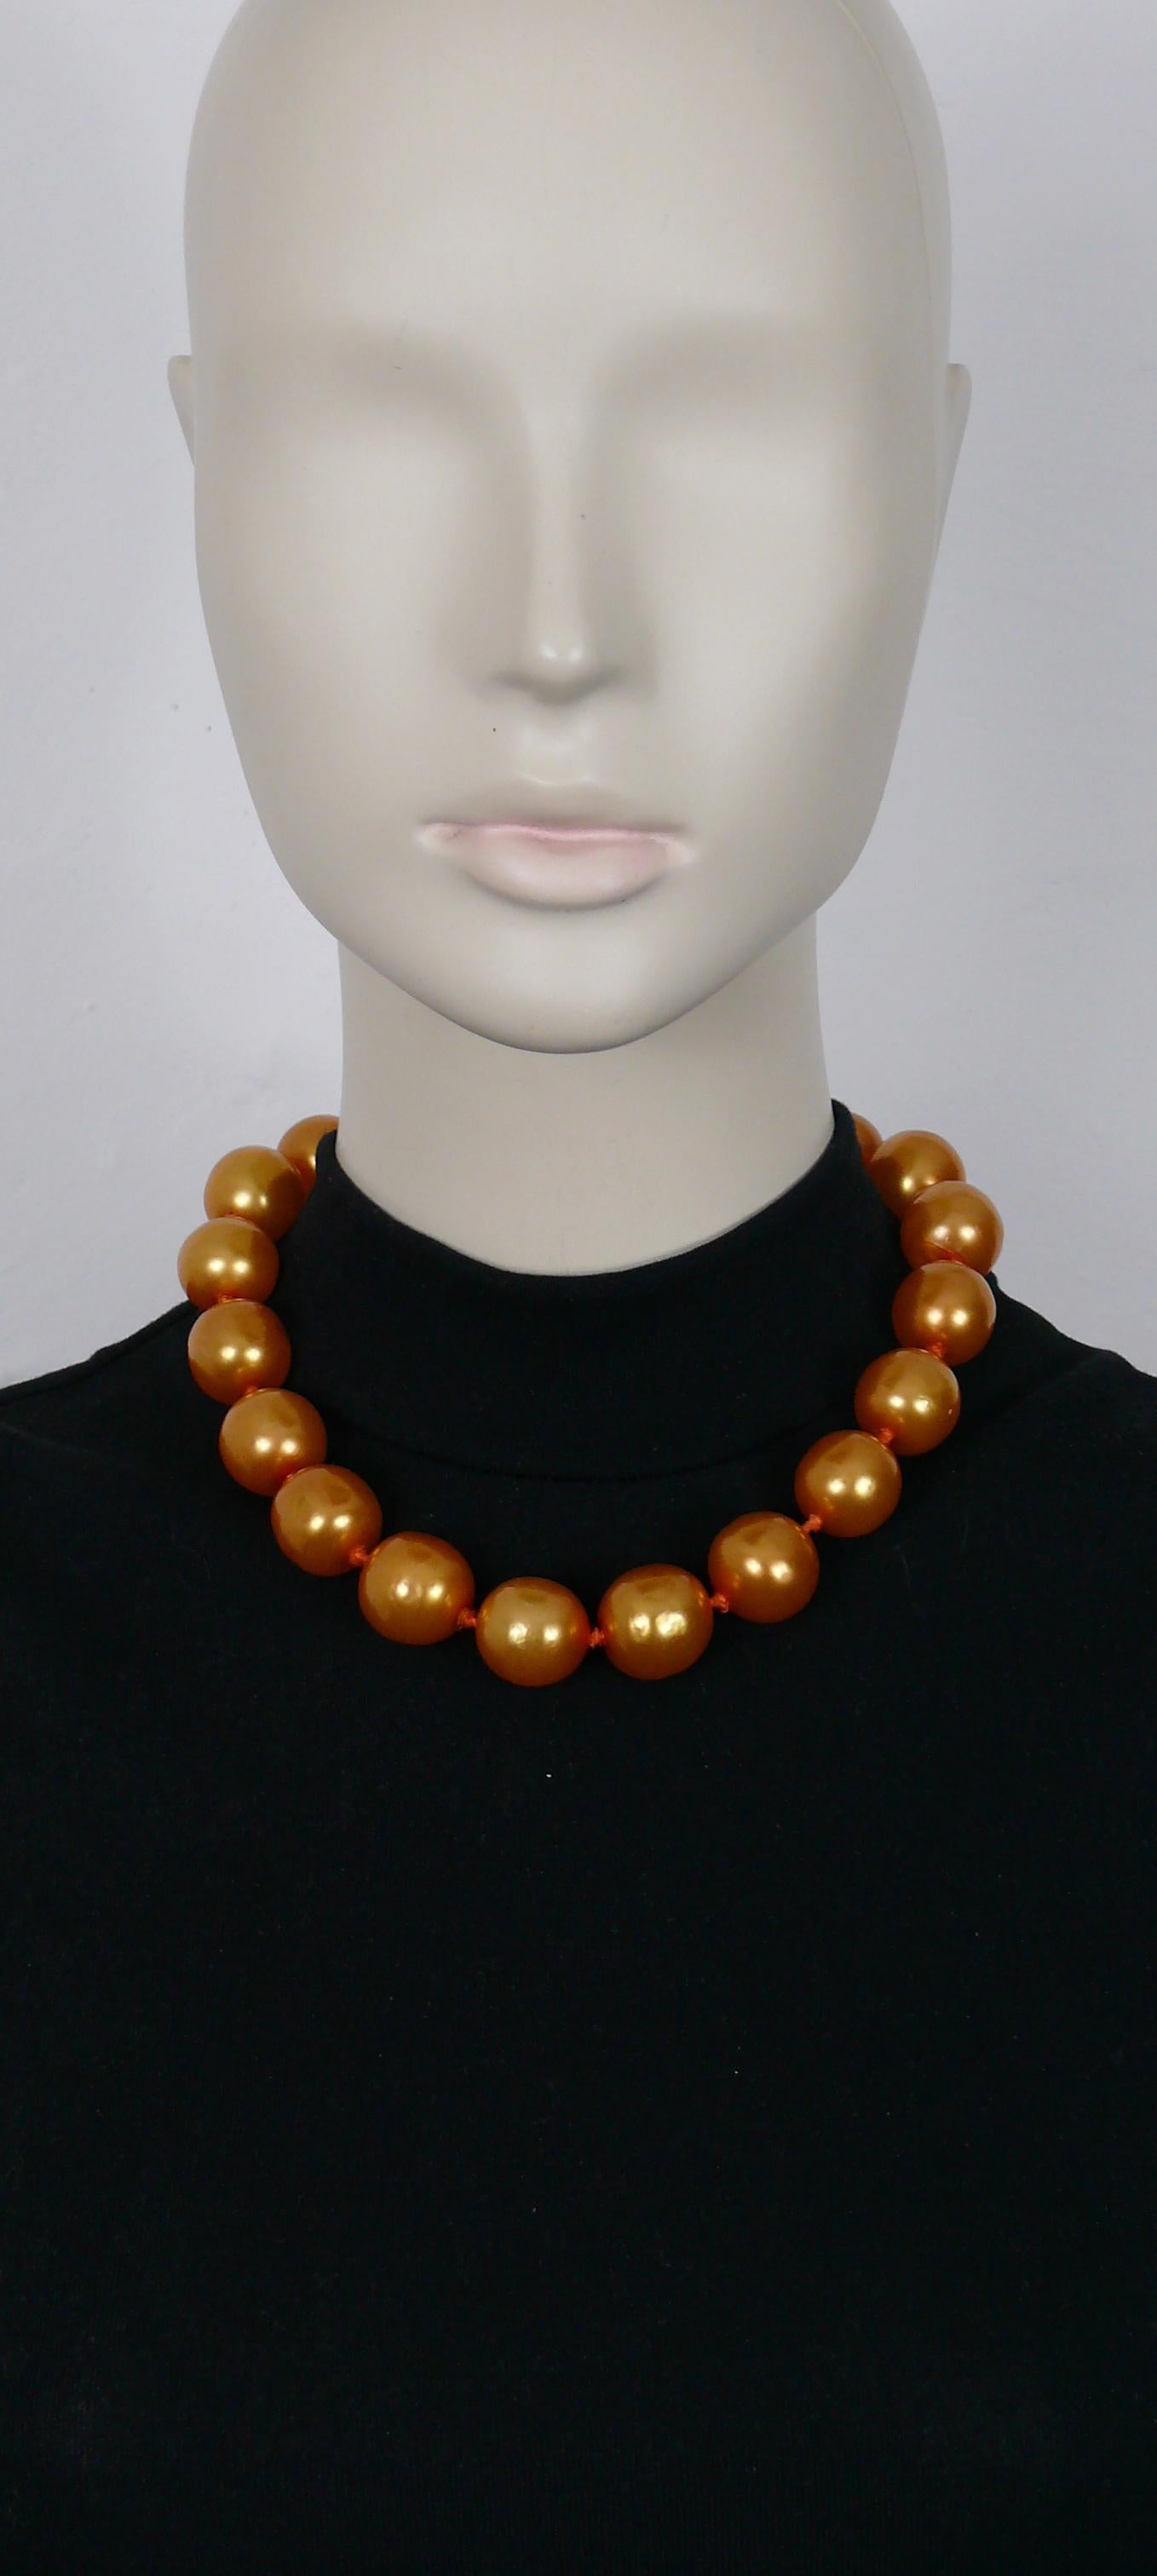 CHANEL vintage large orange faux pearl necklace.

From the collection N°25 (year : 1990).
Jewelry designer VICTOIRE DE CASTELLANE.

Adjustable hook clasp closure.

Embossed CHANEL 2 5 Made in France.

Indicative measurements : adjustable length from